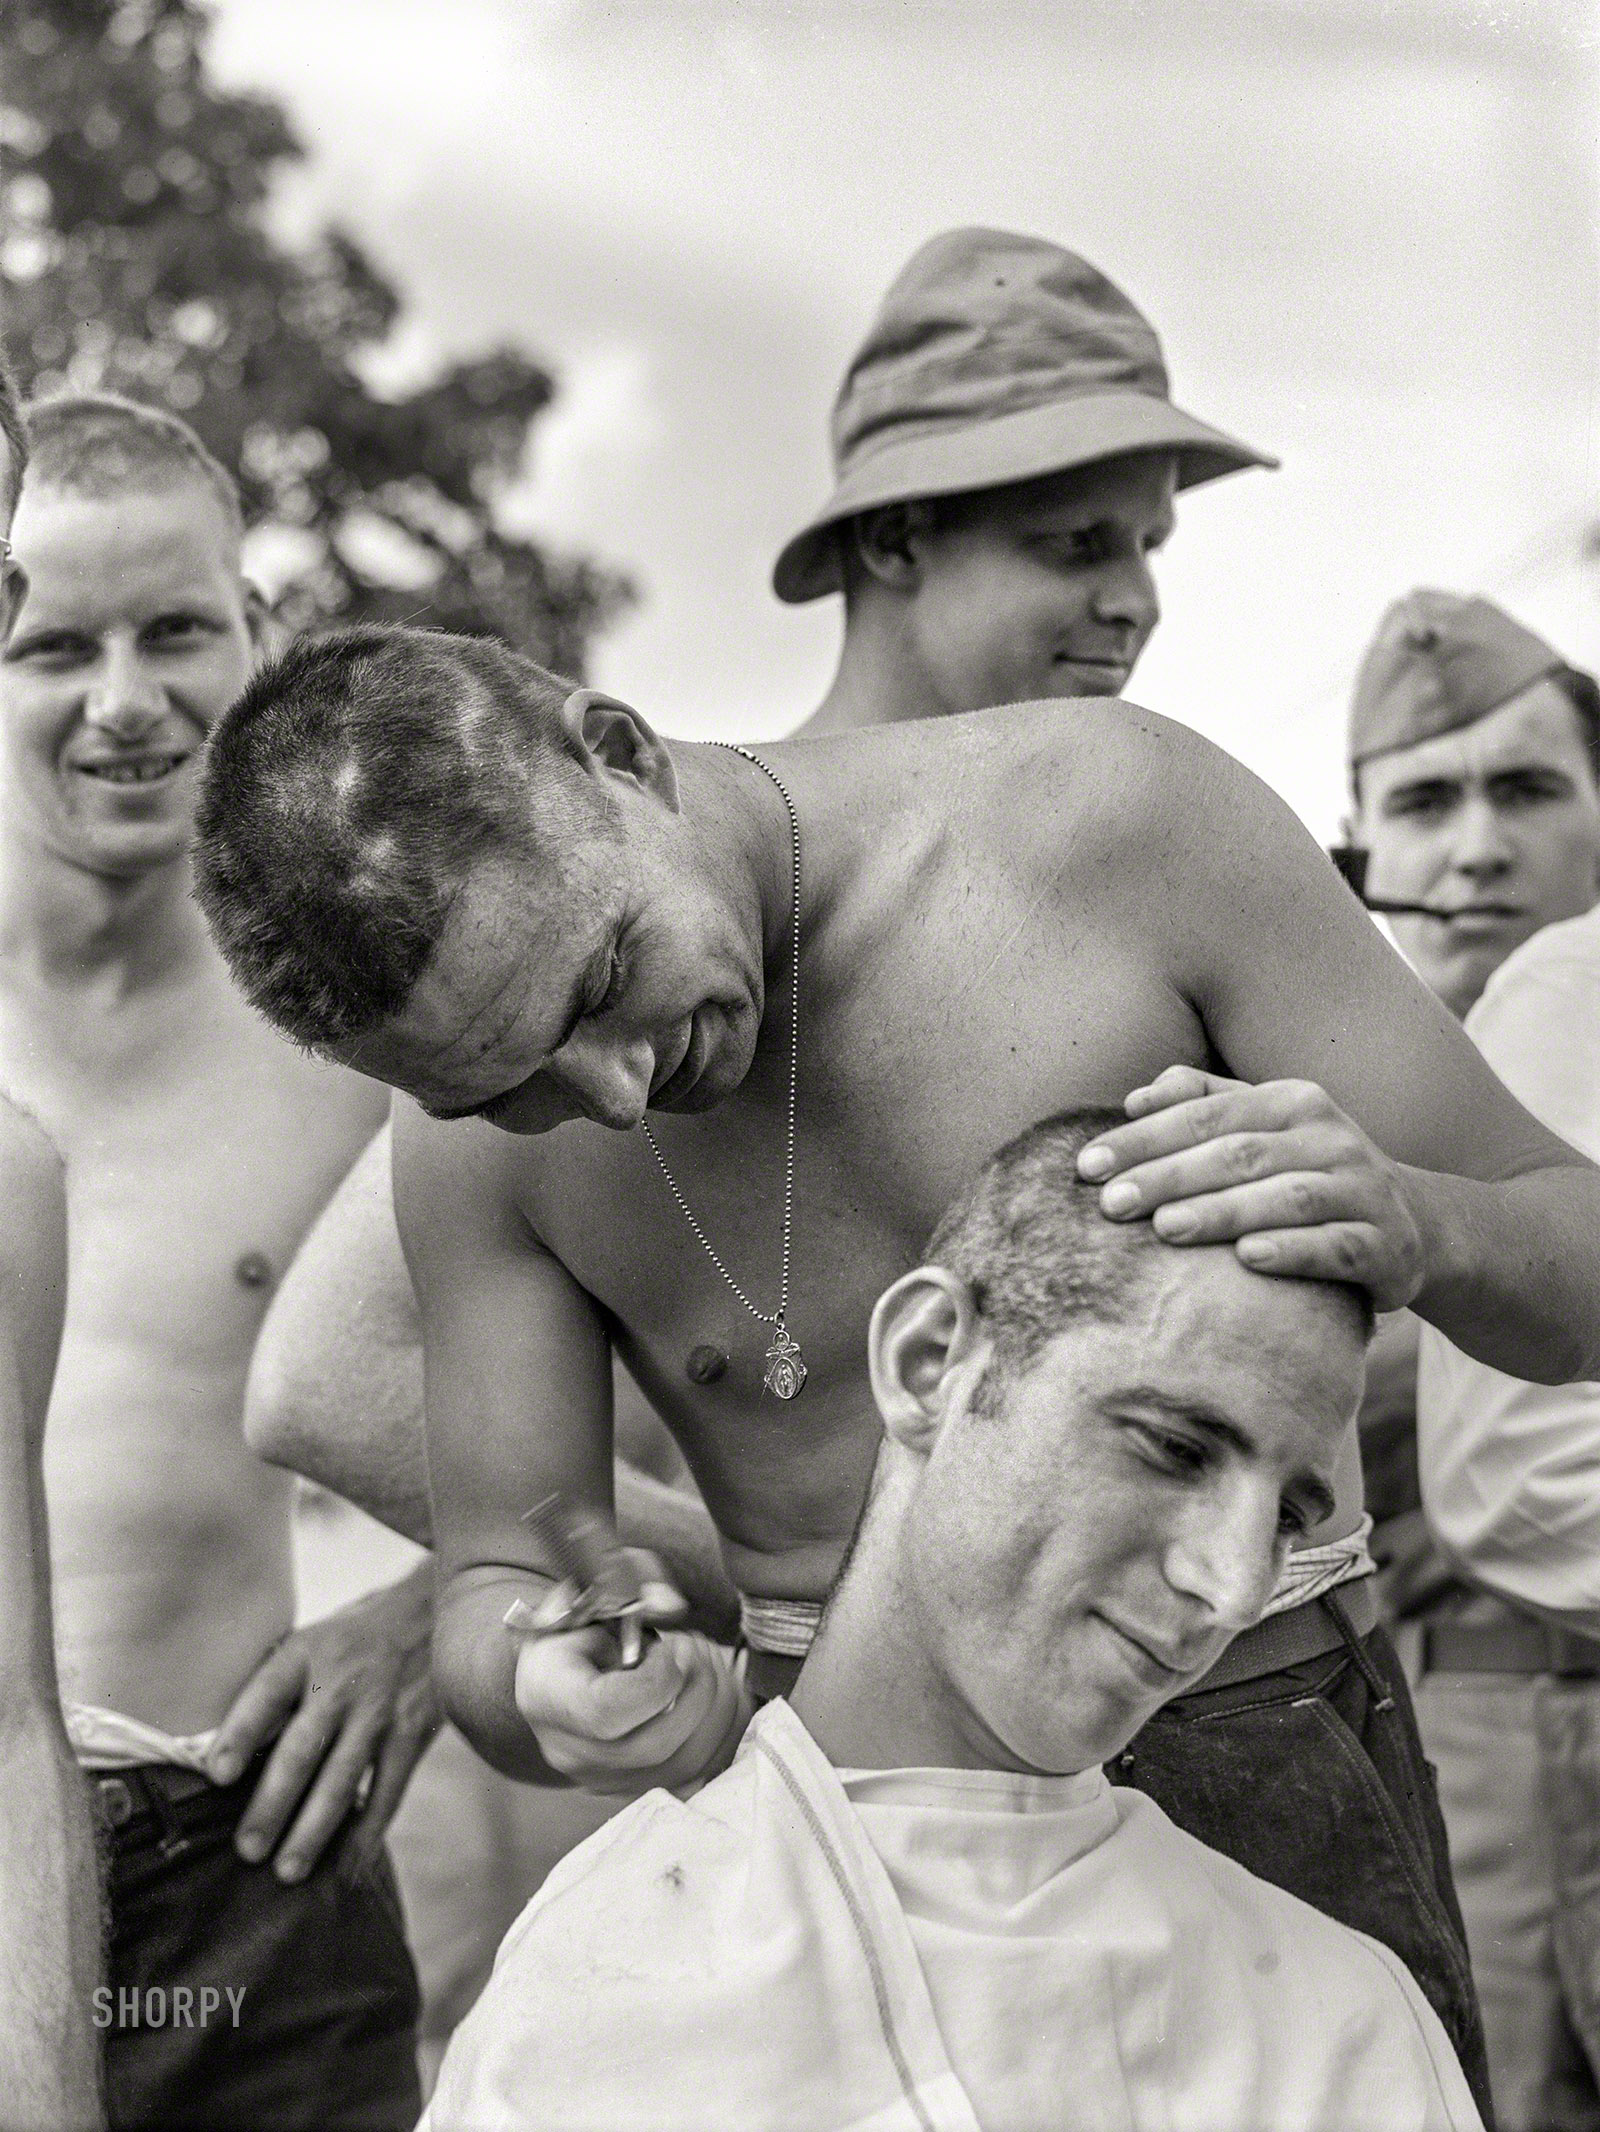 June 1941. "Hattiesburg, Mississippi. Getting a haircut at Camp Shelby." The gents last seen here. Medium format acetate negative by William Perlitch. View full size.